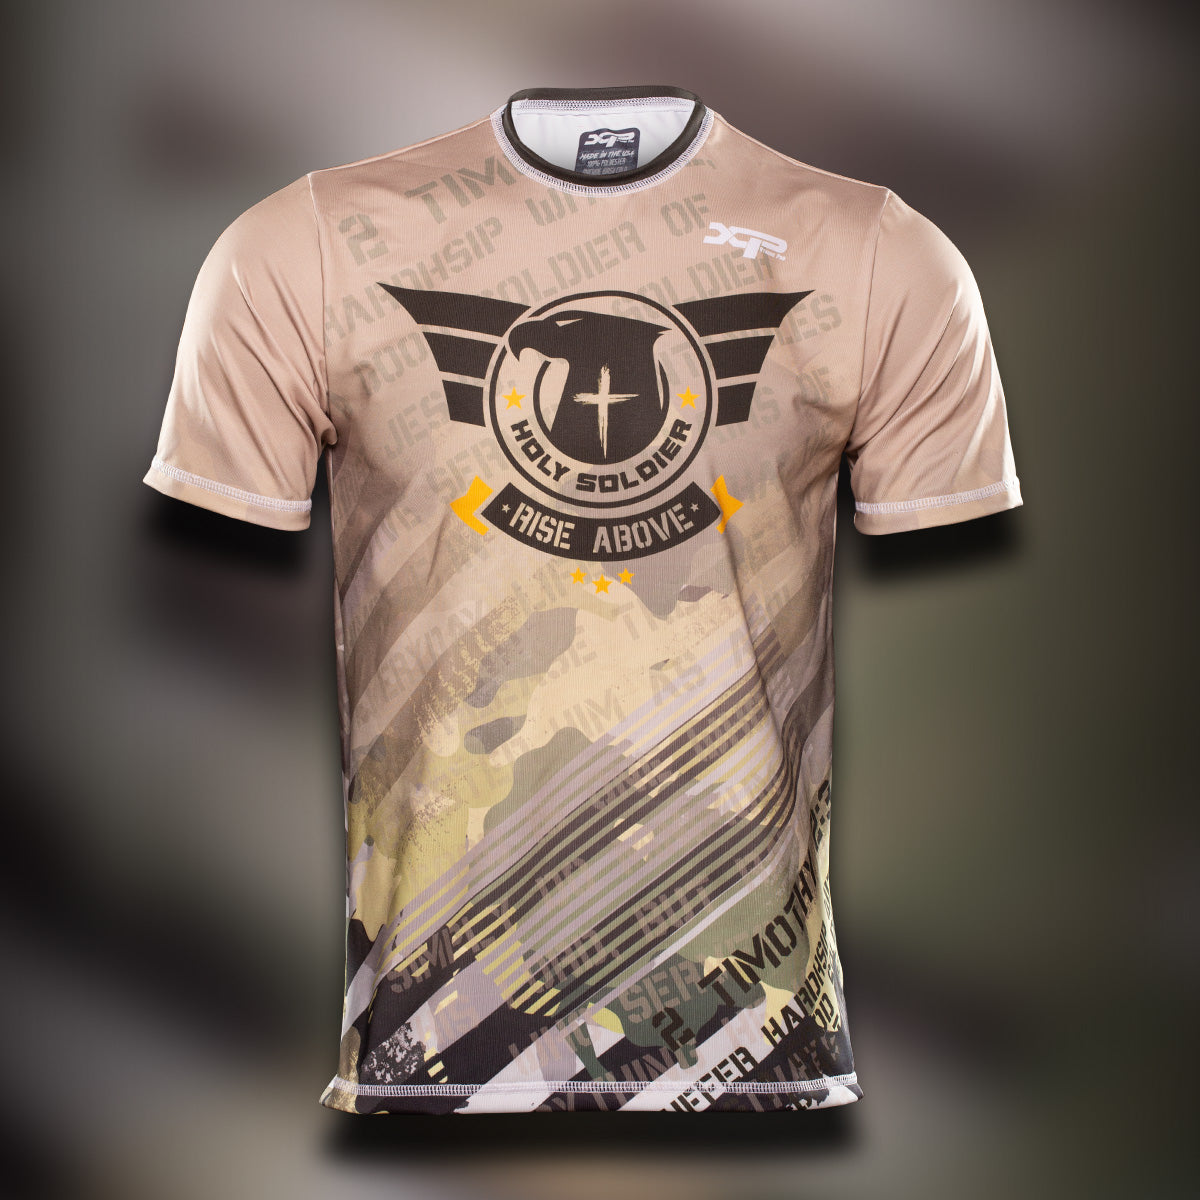 Holy Soldier Compression Shirt Xtreme Pro Apparel